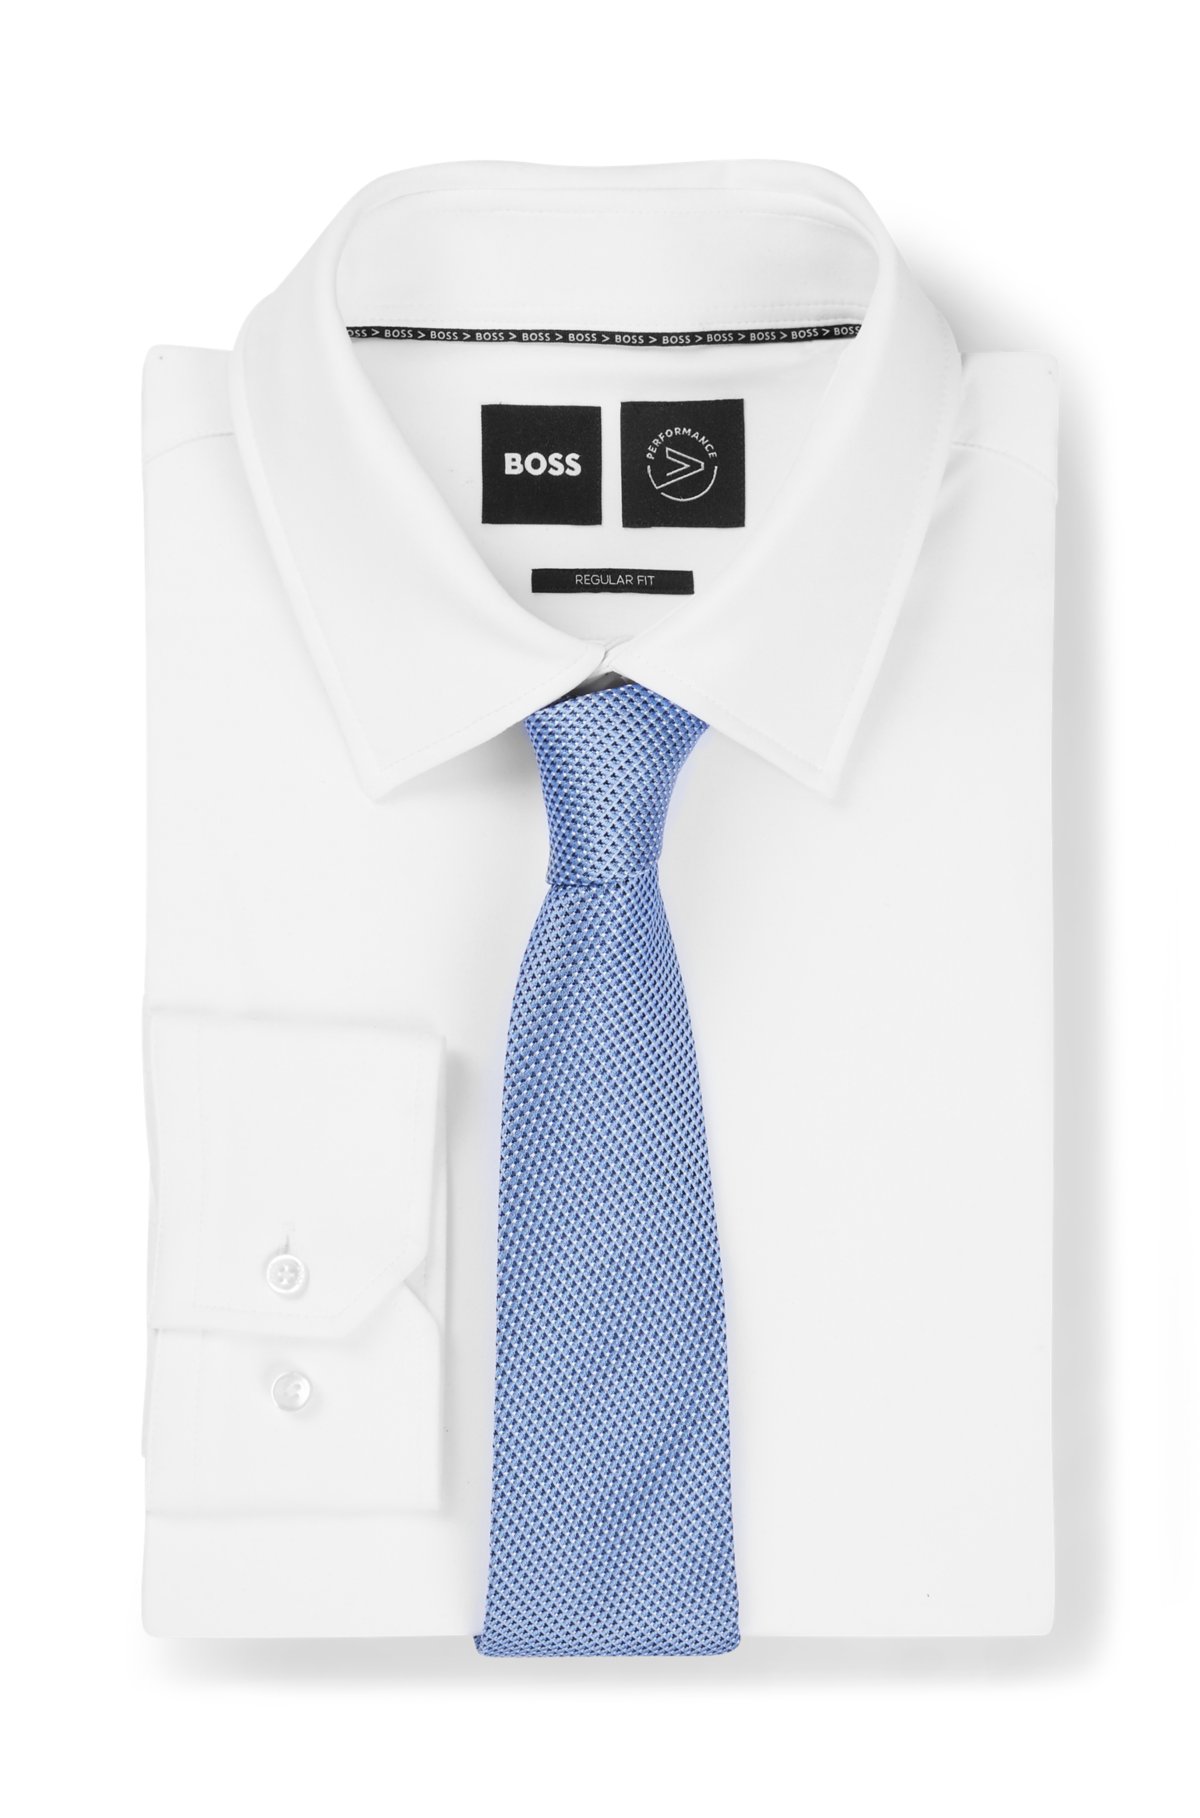 Silk-jacquard tie with all-over micro pattern, Light Blue